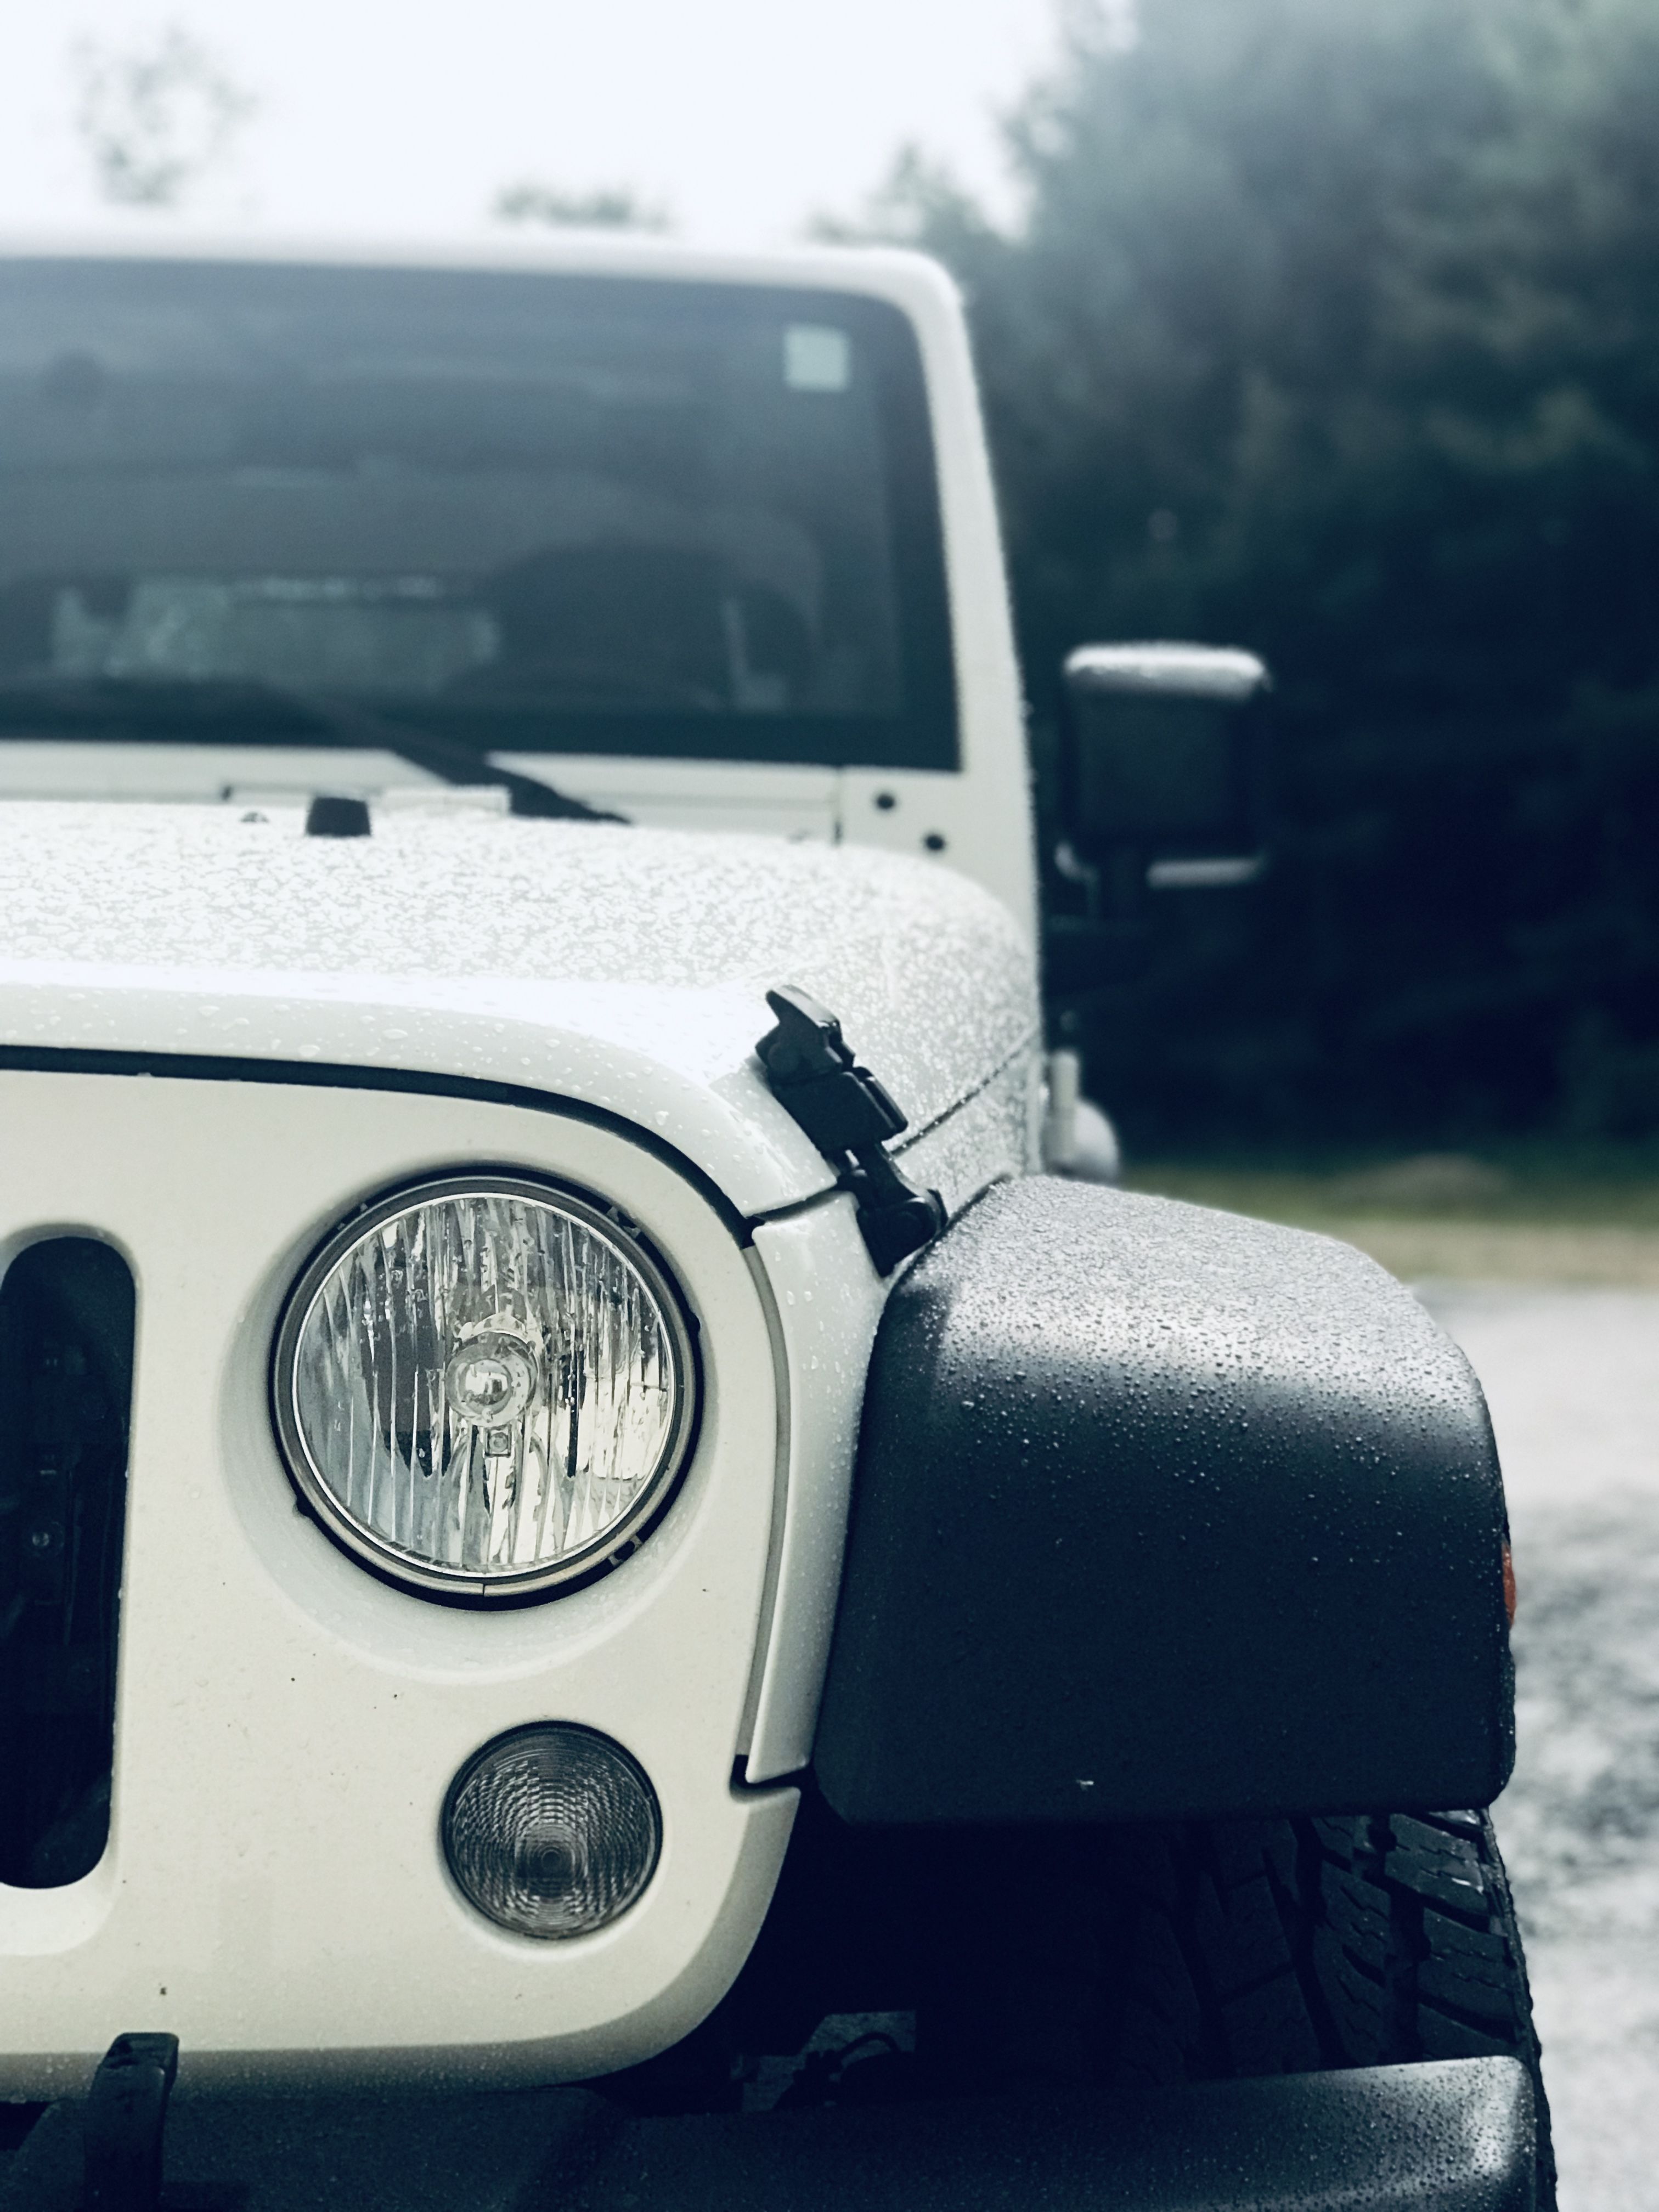 White Jeep iPhone portrait mode phone wallpaper or background. Jeep wrangler, Jeep, White jeep